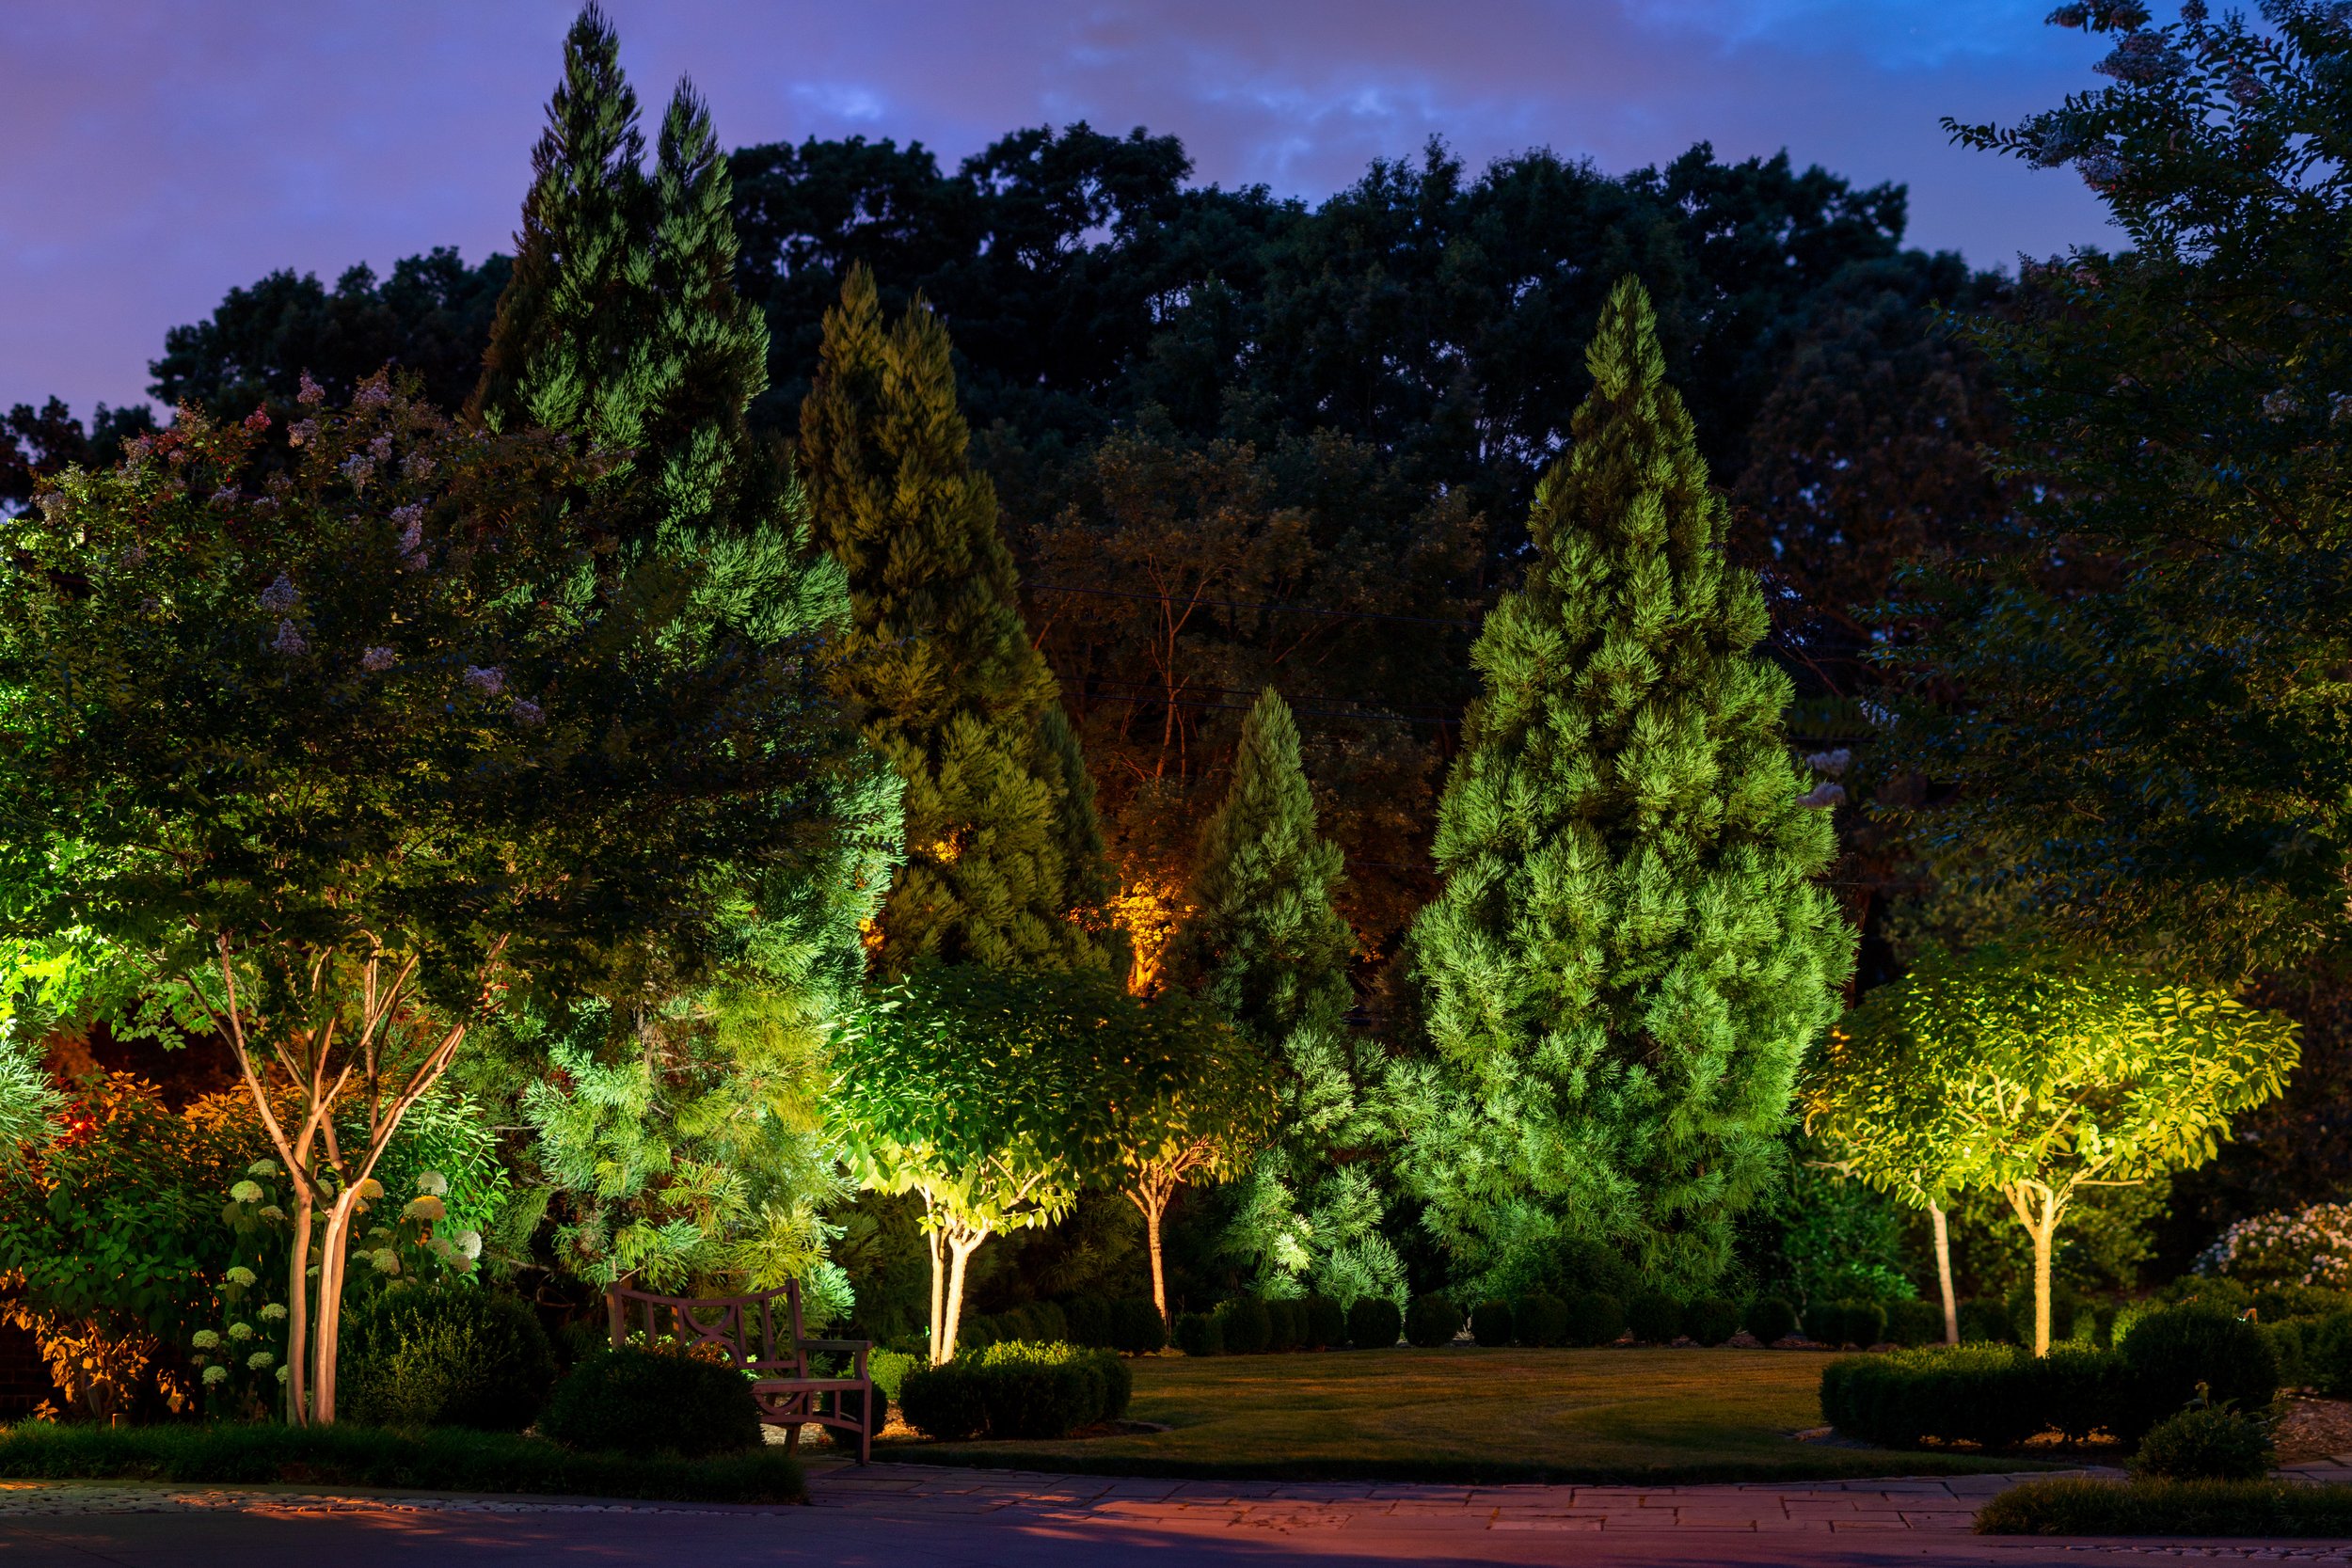  We used warm lights on the Crepe Myrtles and small trees and we used cooler temperature lights on the evergreen trees. The cool lights bring out the vibrant greens of the pine needles whereas the warm lights bring out the beautiful color and shapes 